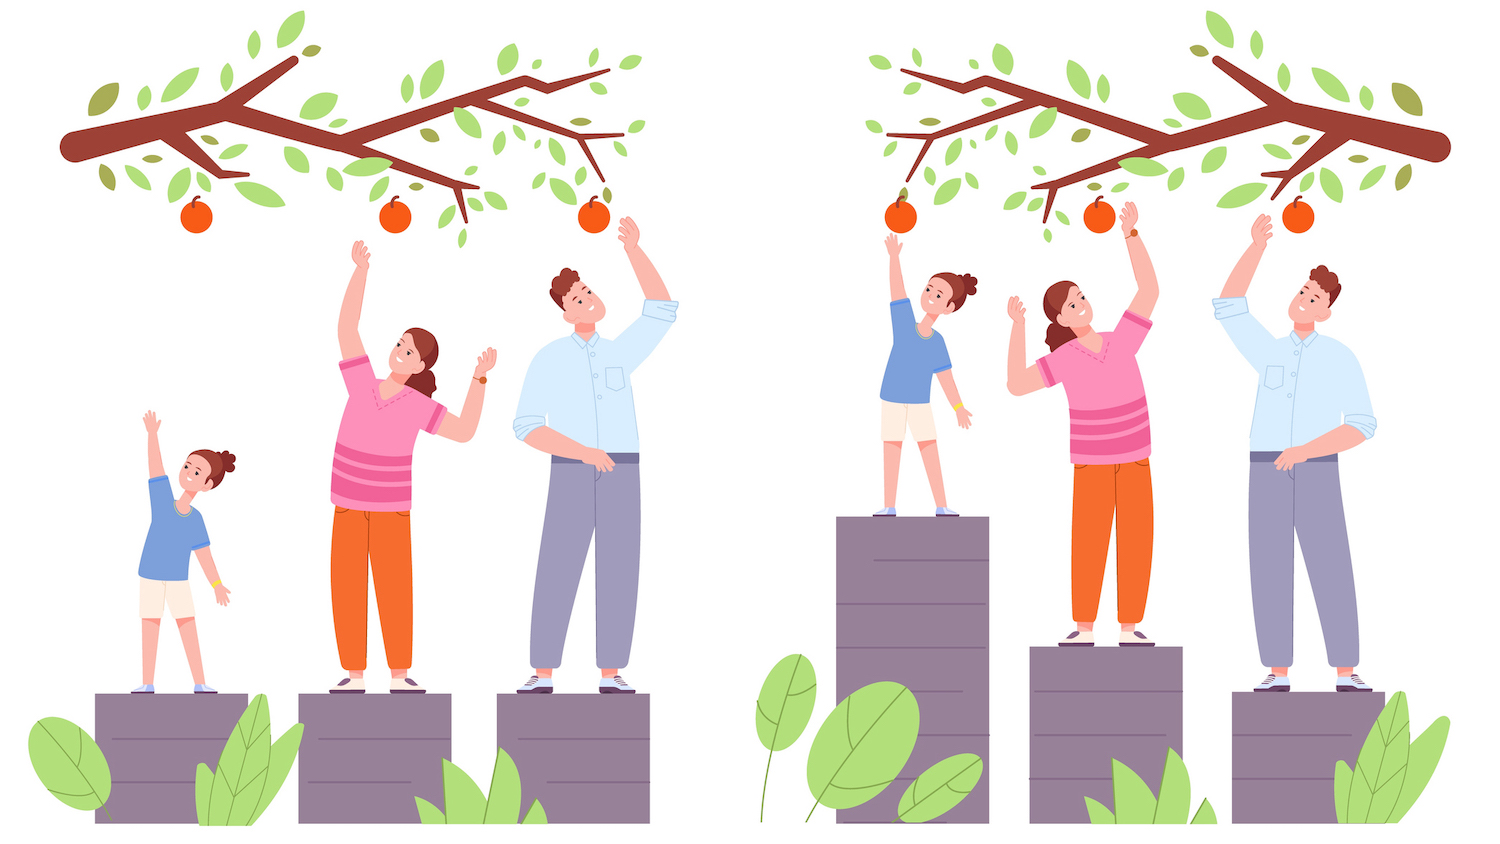 Equality and equity illustration, RLB